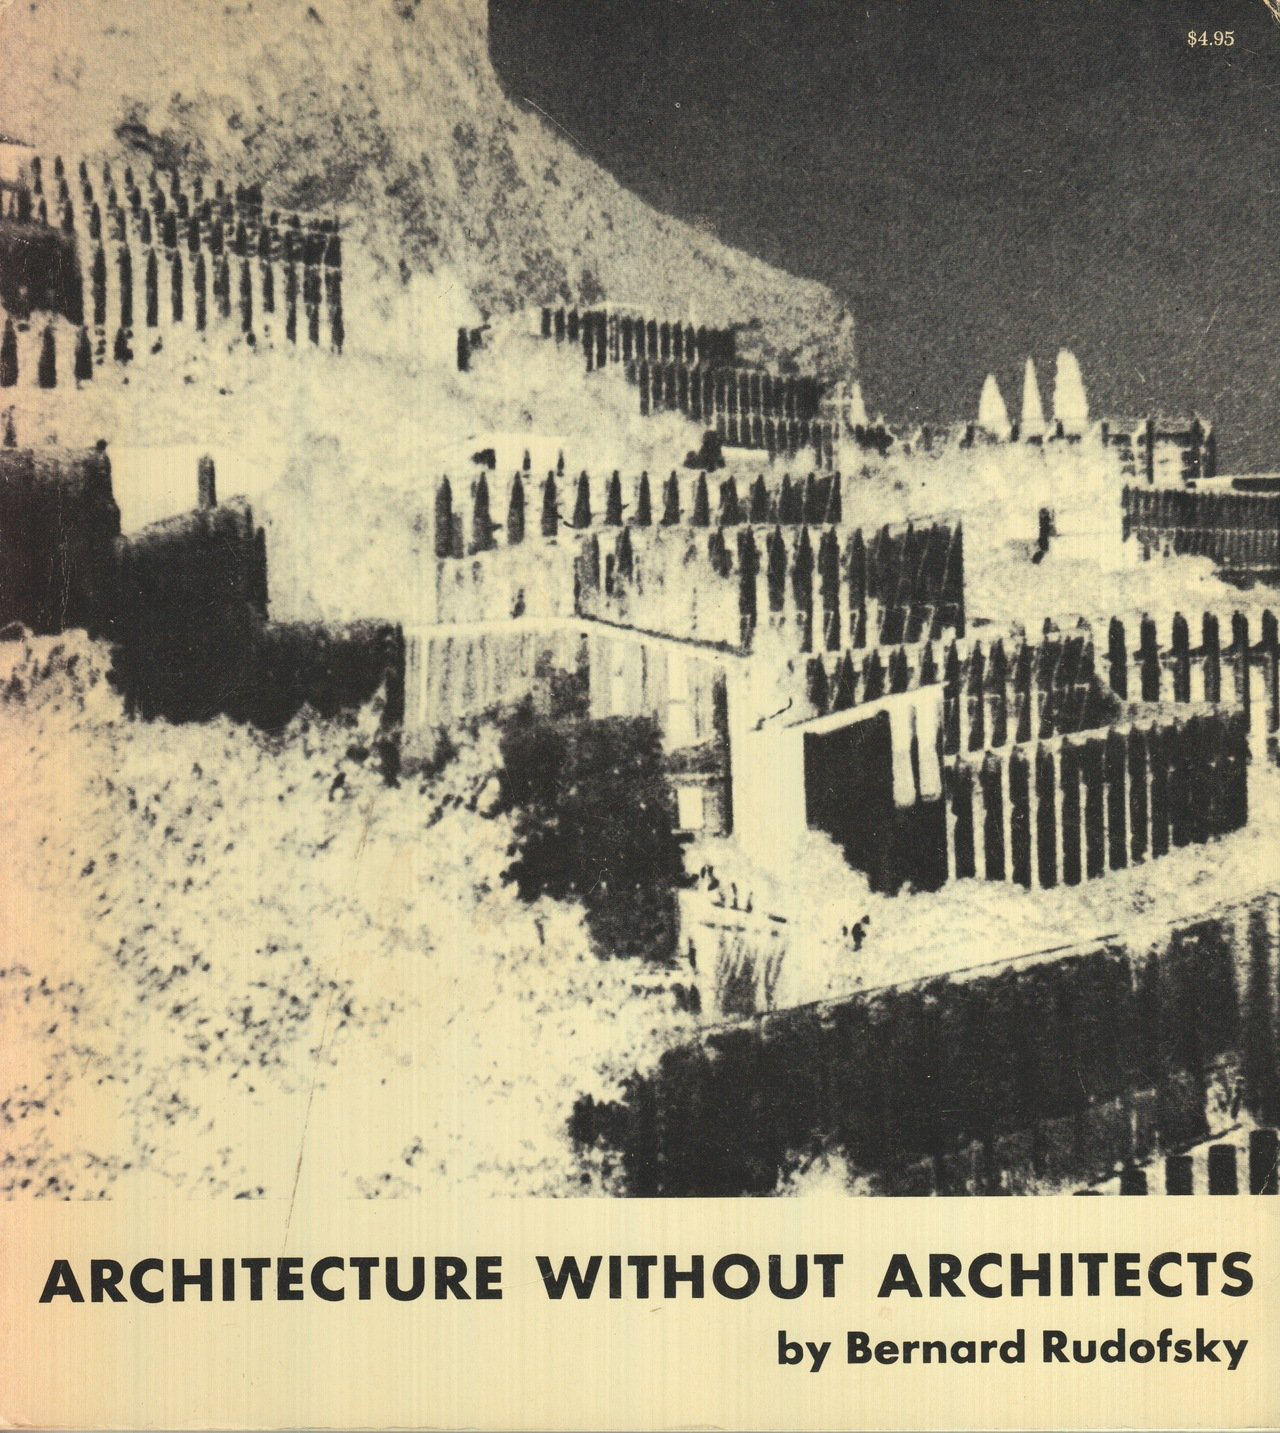 Cover of "Architecture Without Architects" book by Bernard Rudofsky.